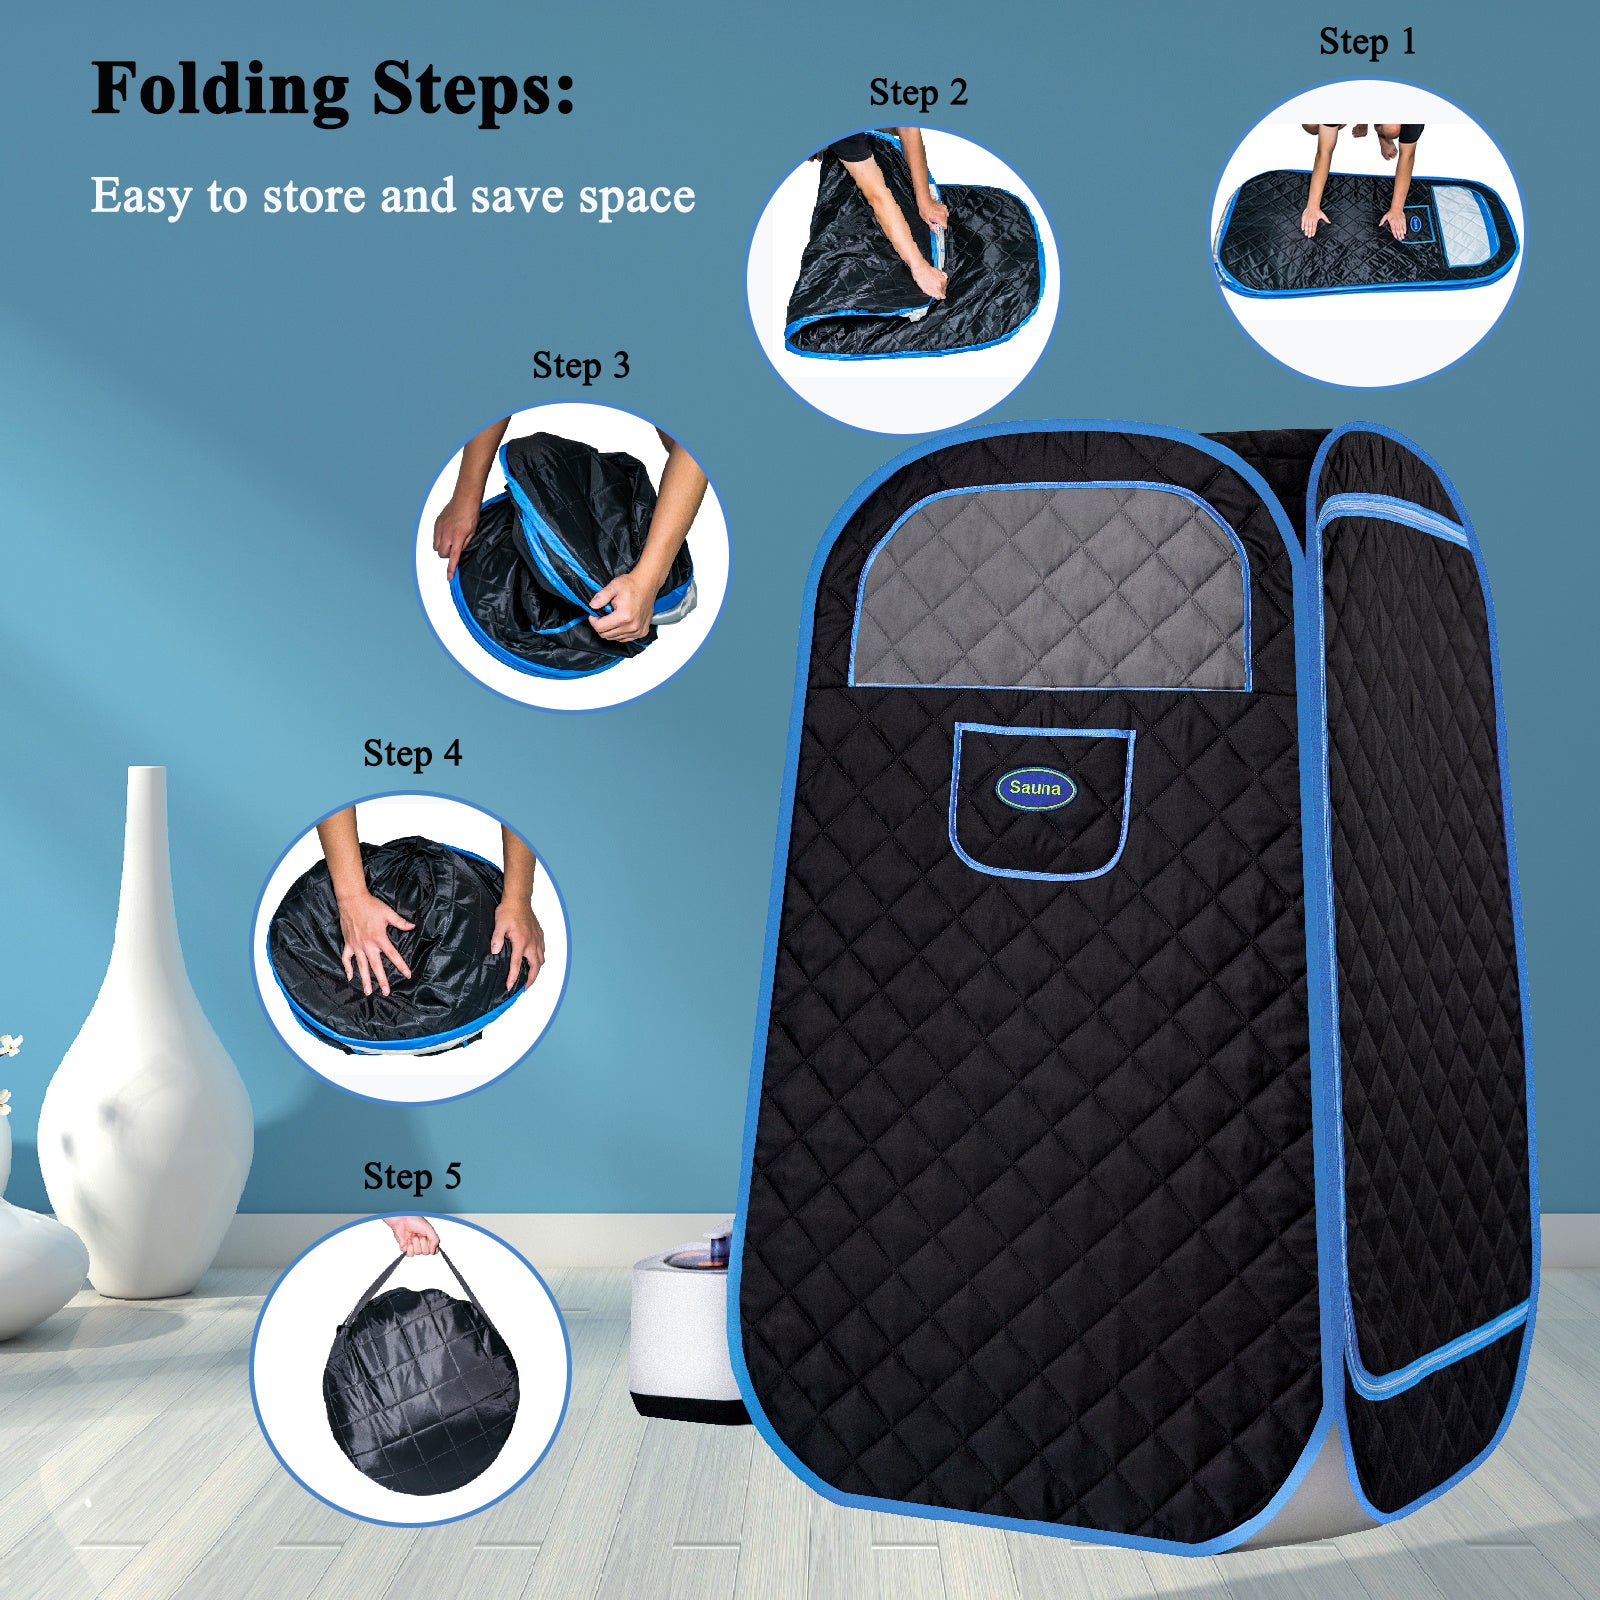 Image showing how to fold the Portable Folding Full size Steam Sauna with 1000W&2.2L steam Generator.